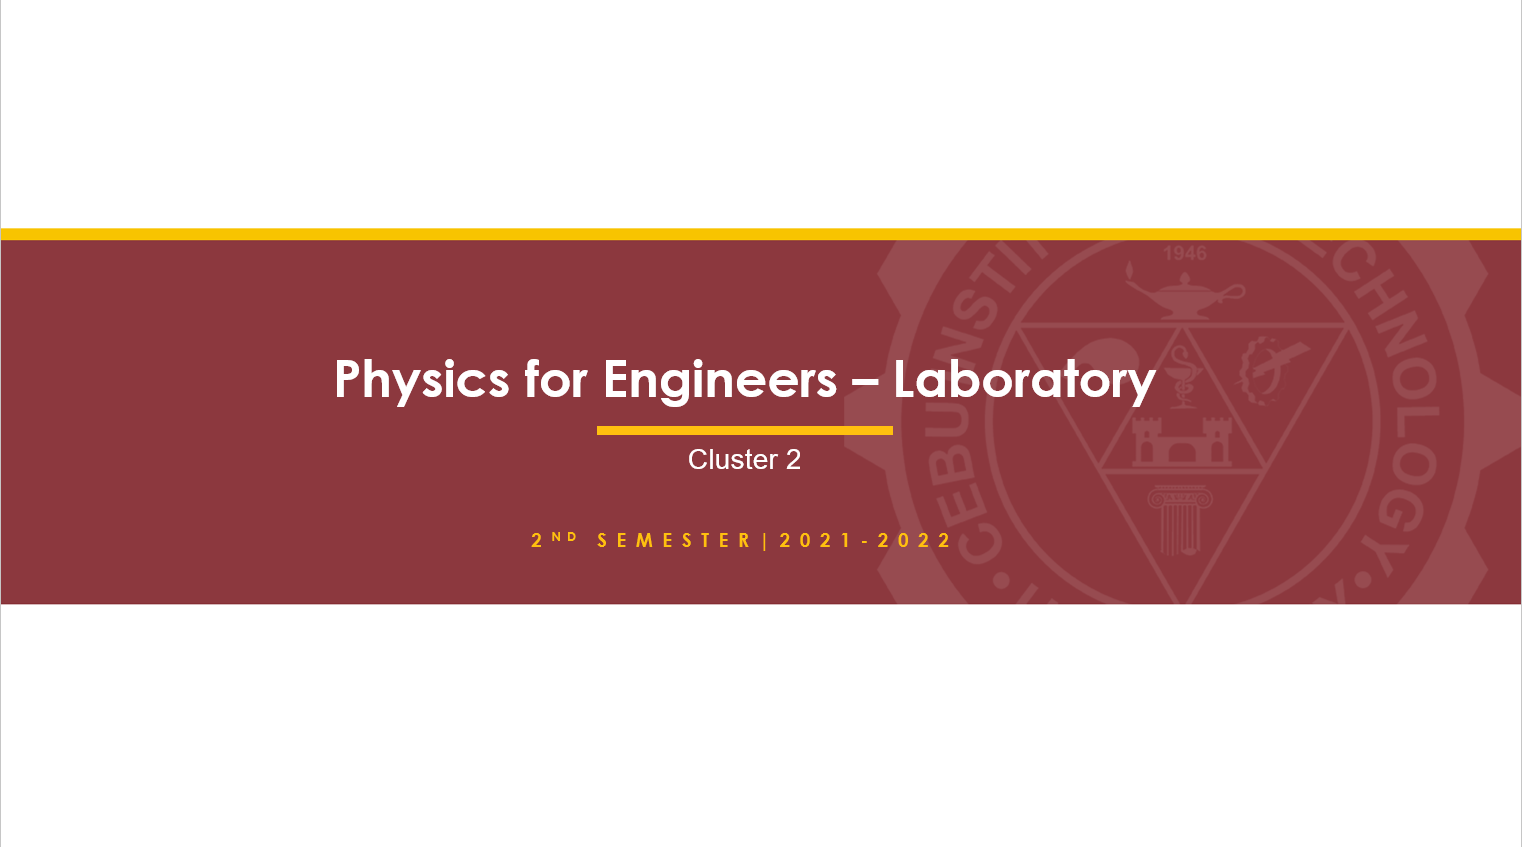 PHYS182 Physics for Engineers - Laboratory